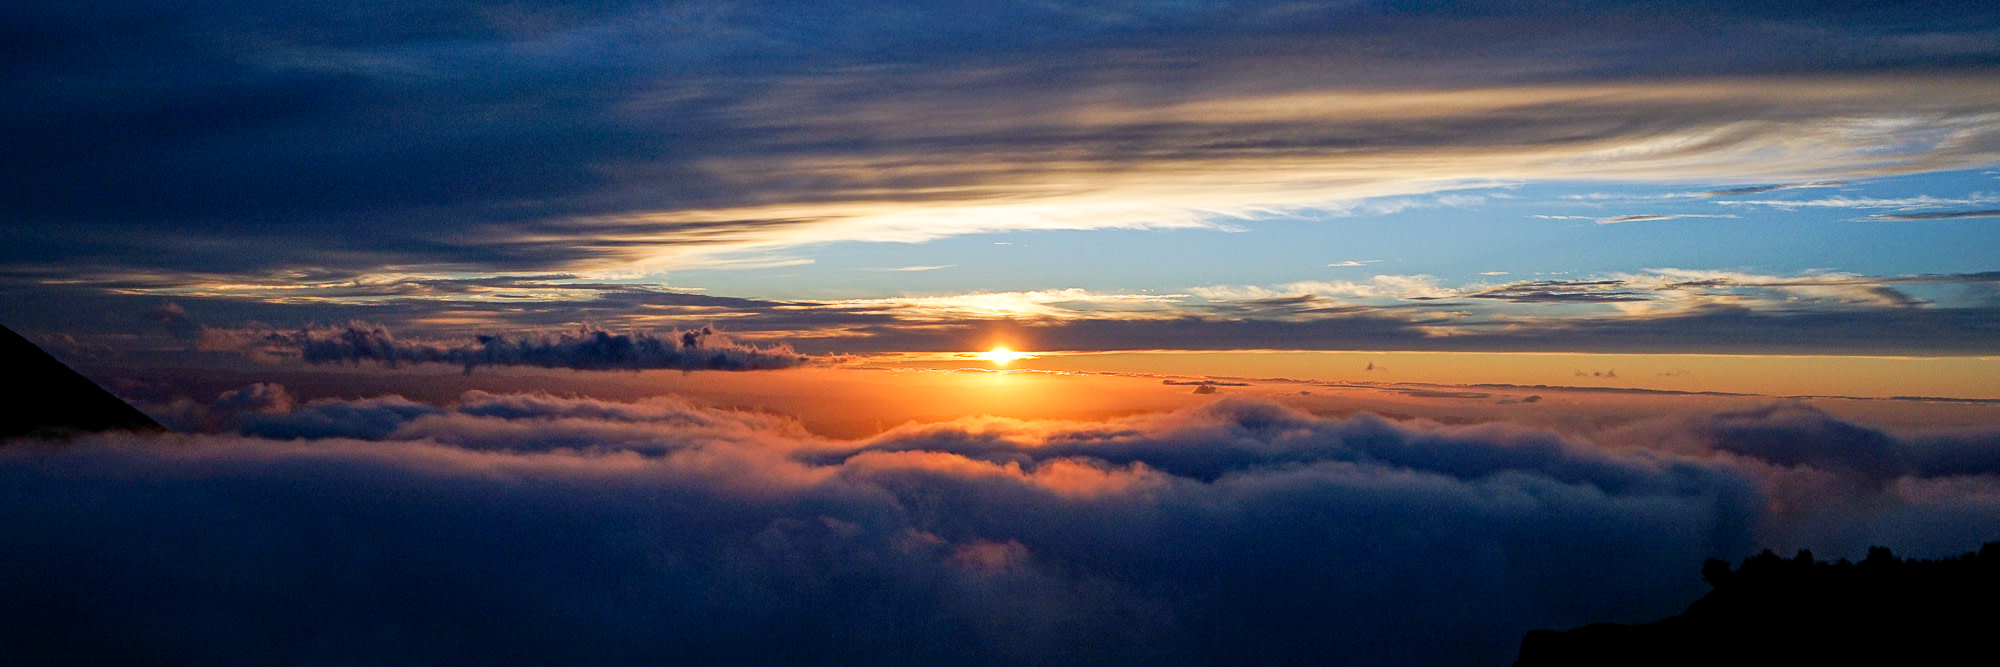 A spectacular sunset seen from high up in the Daisetsuzan mountains. The sun is just about to drop below the horizon, casting an orange light over clouds below the photographer. Dark clouds higher in the sky frame the sun.